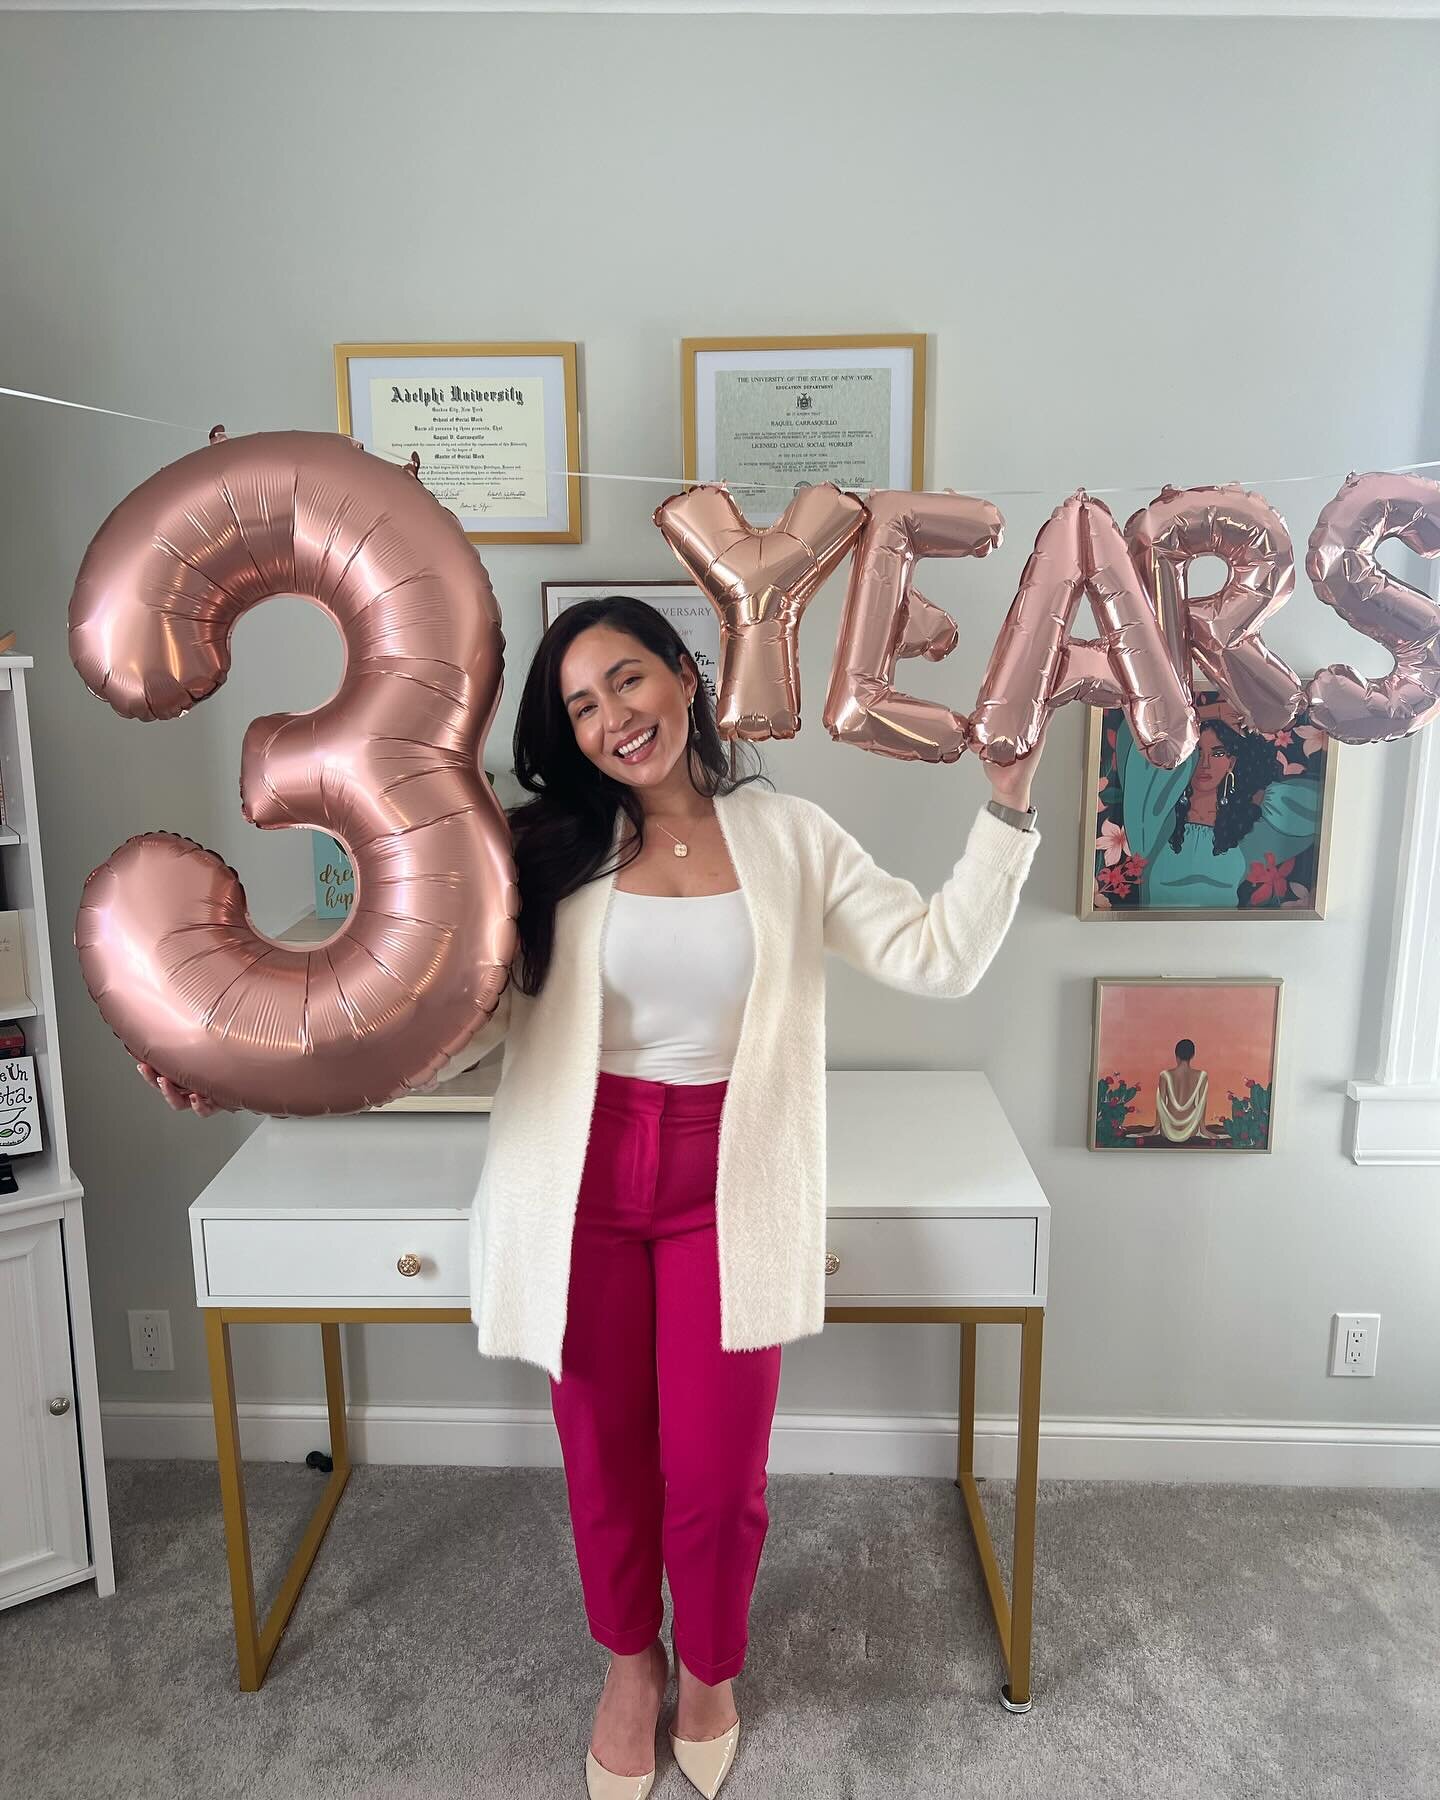 Happy 3rd Birthday to my business!!! 🥳

🙏 I am beyond grateful for all I have learned over the past 3 years, and for the loving support from others along the way. 

🎉As part of my celebration, I have created a monthly newsletter and will be sendin